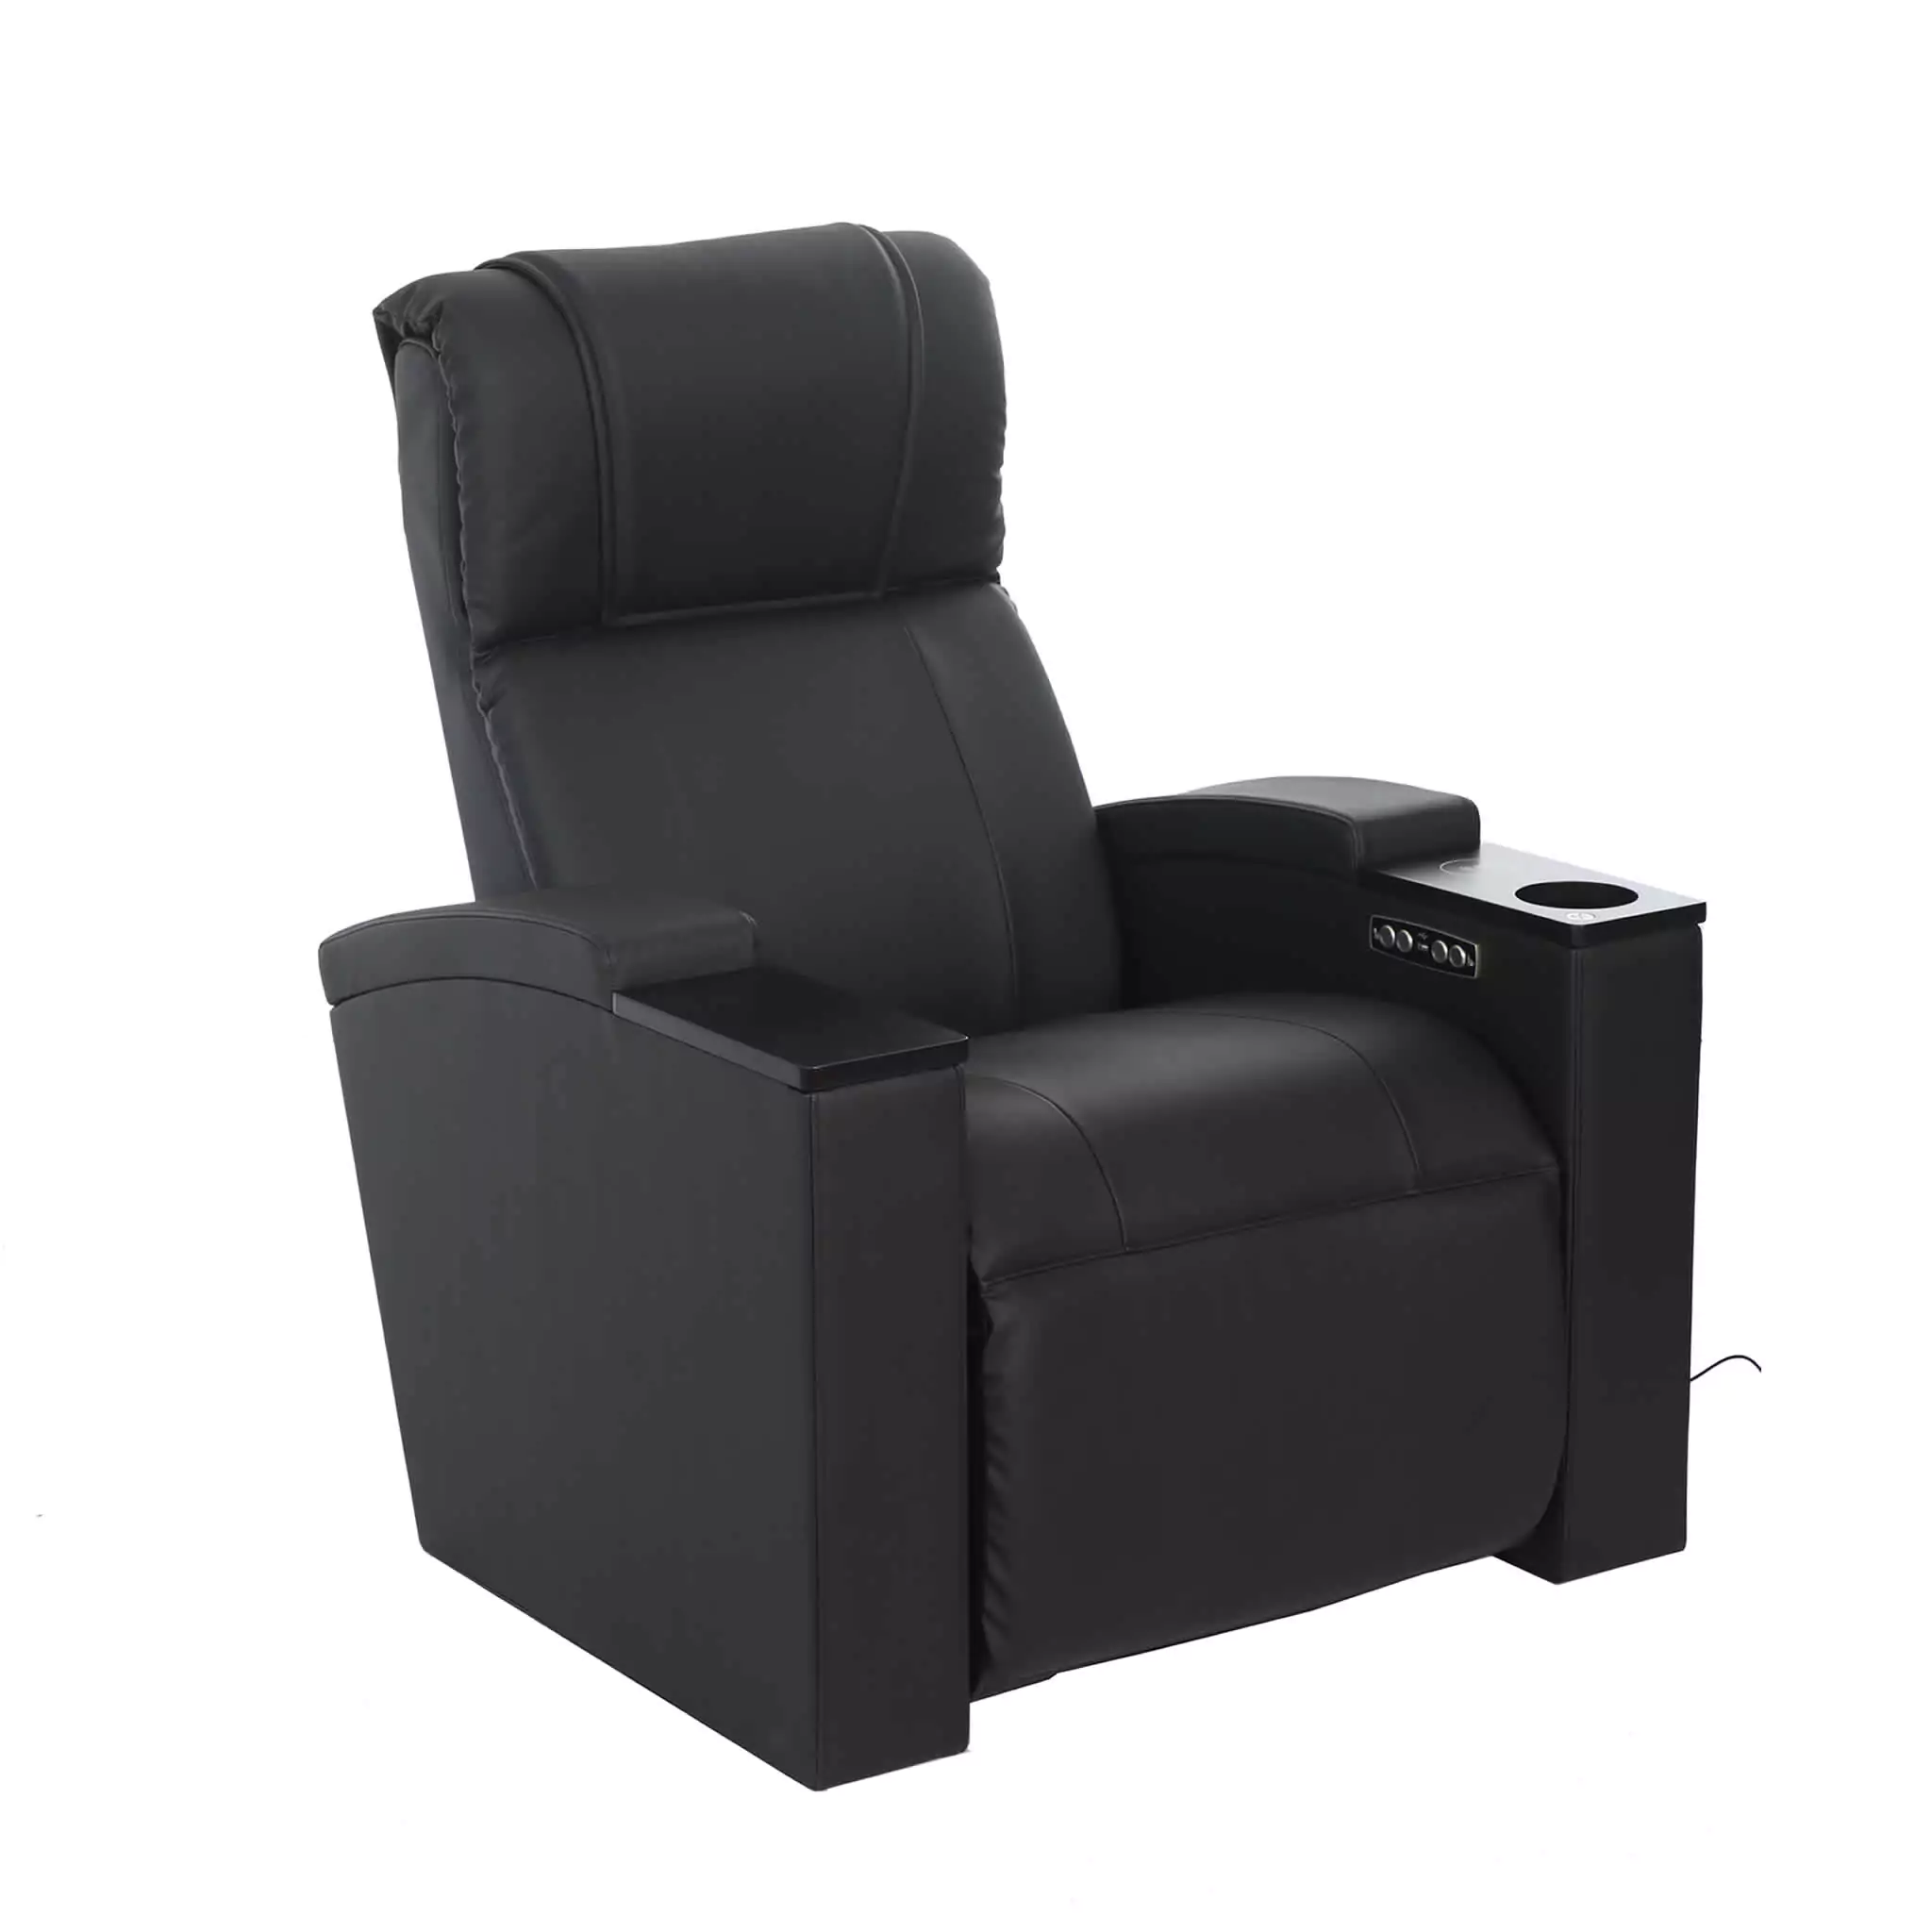 Simko Seating Products Recliner Cinema Seat Monstone 04